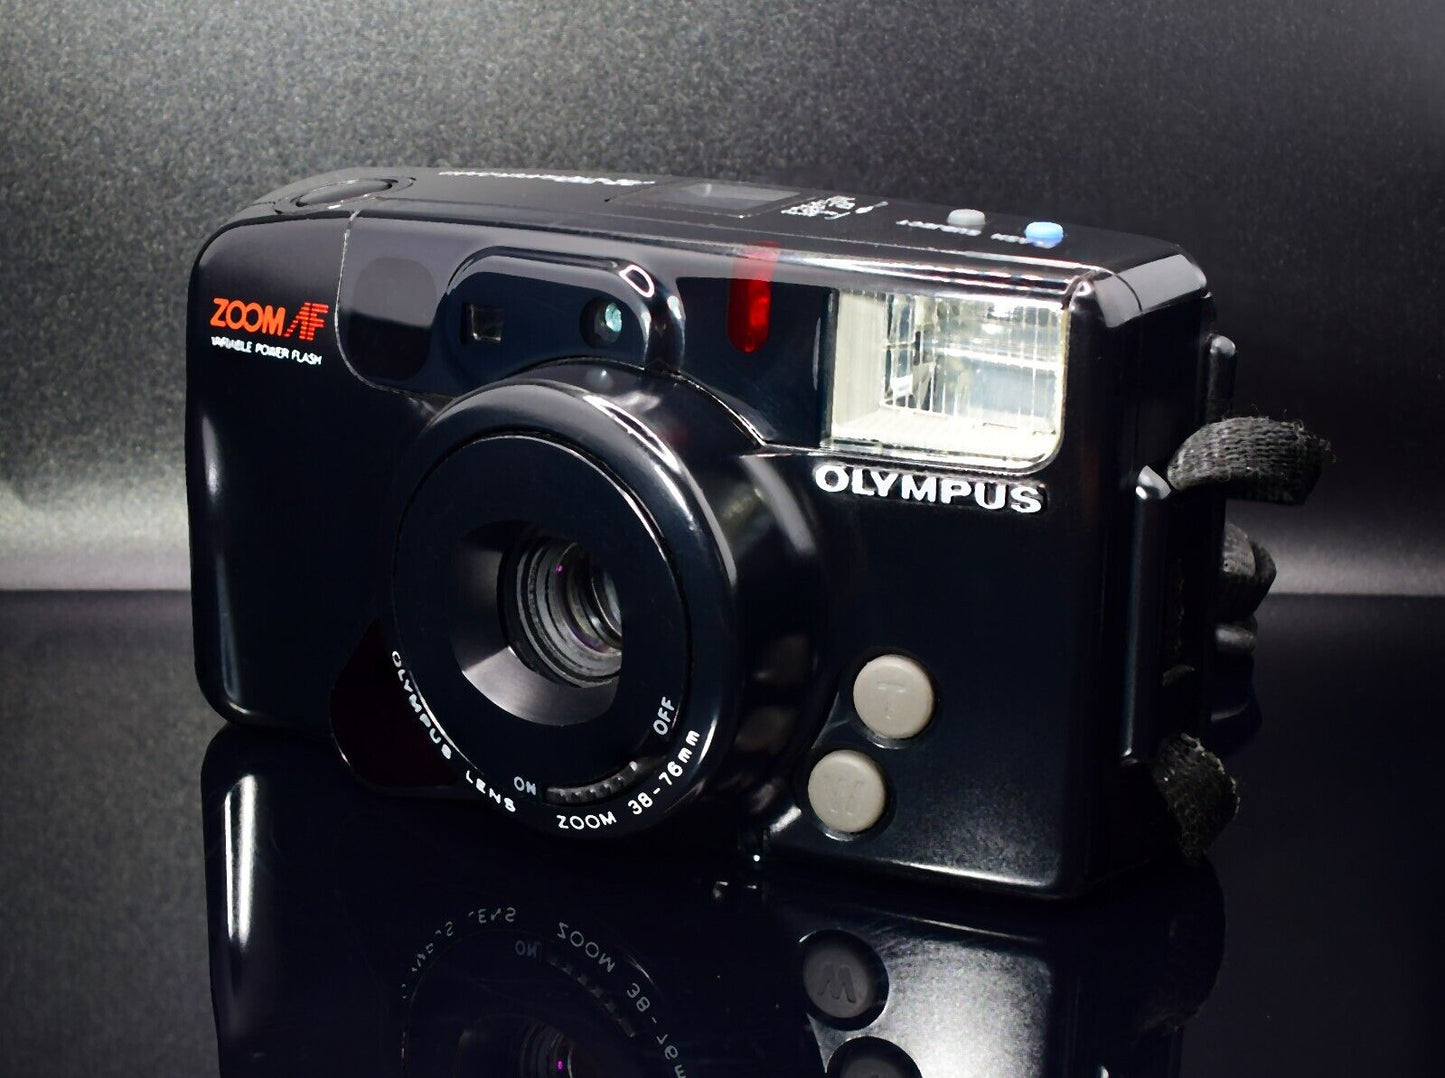 Olympus AZ 210 SUPERZOOM Vintage 35mm Compact Film Camera with Olympus Protective Carry Case